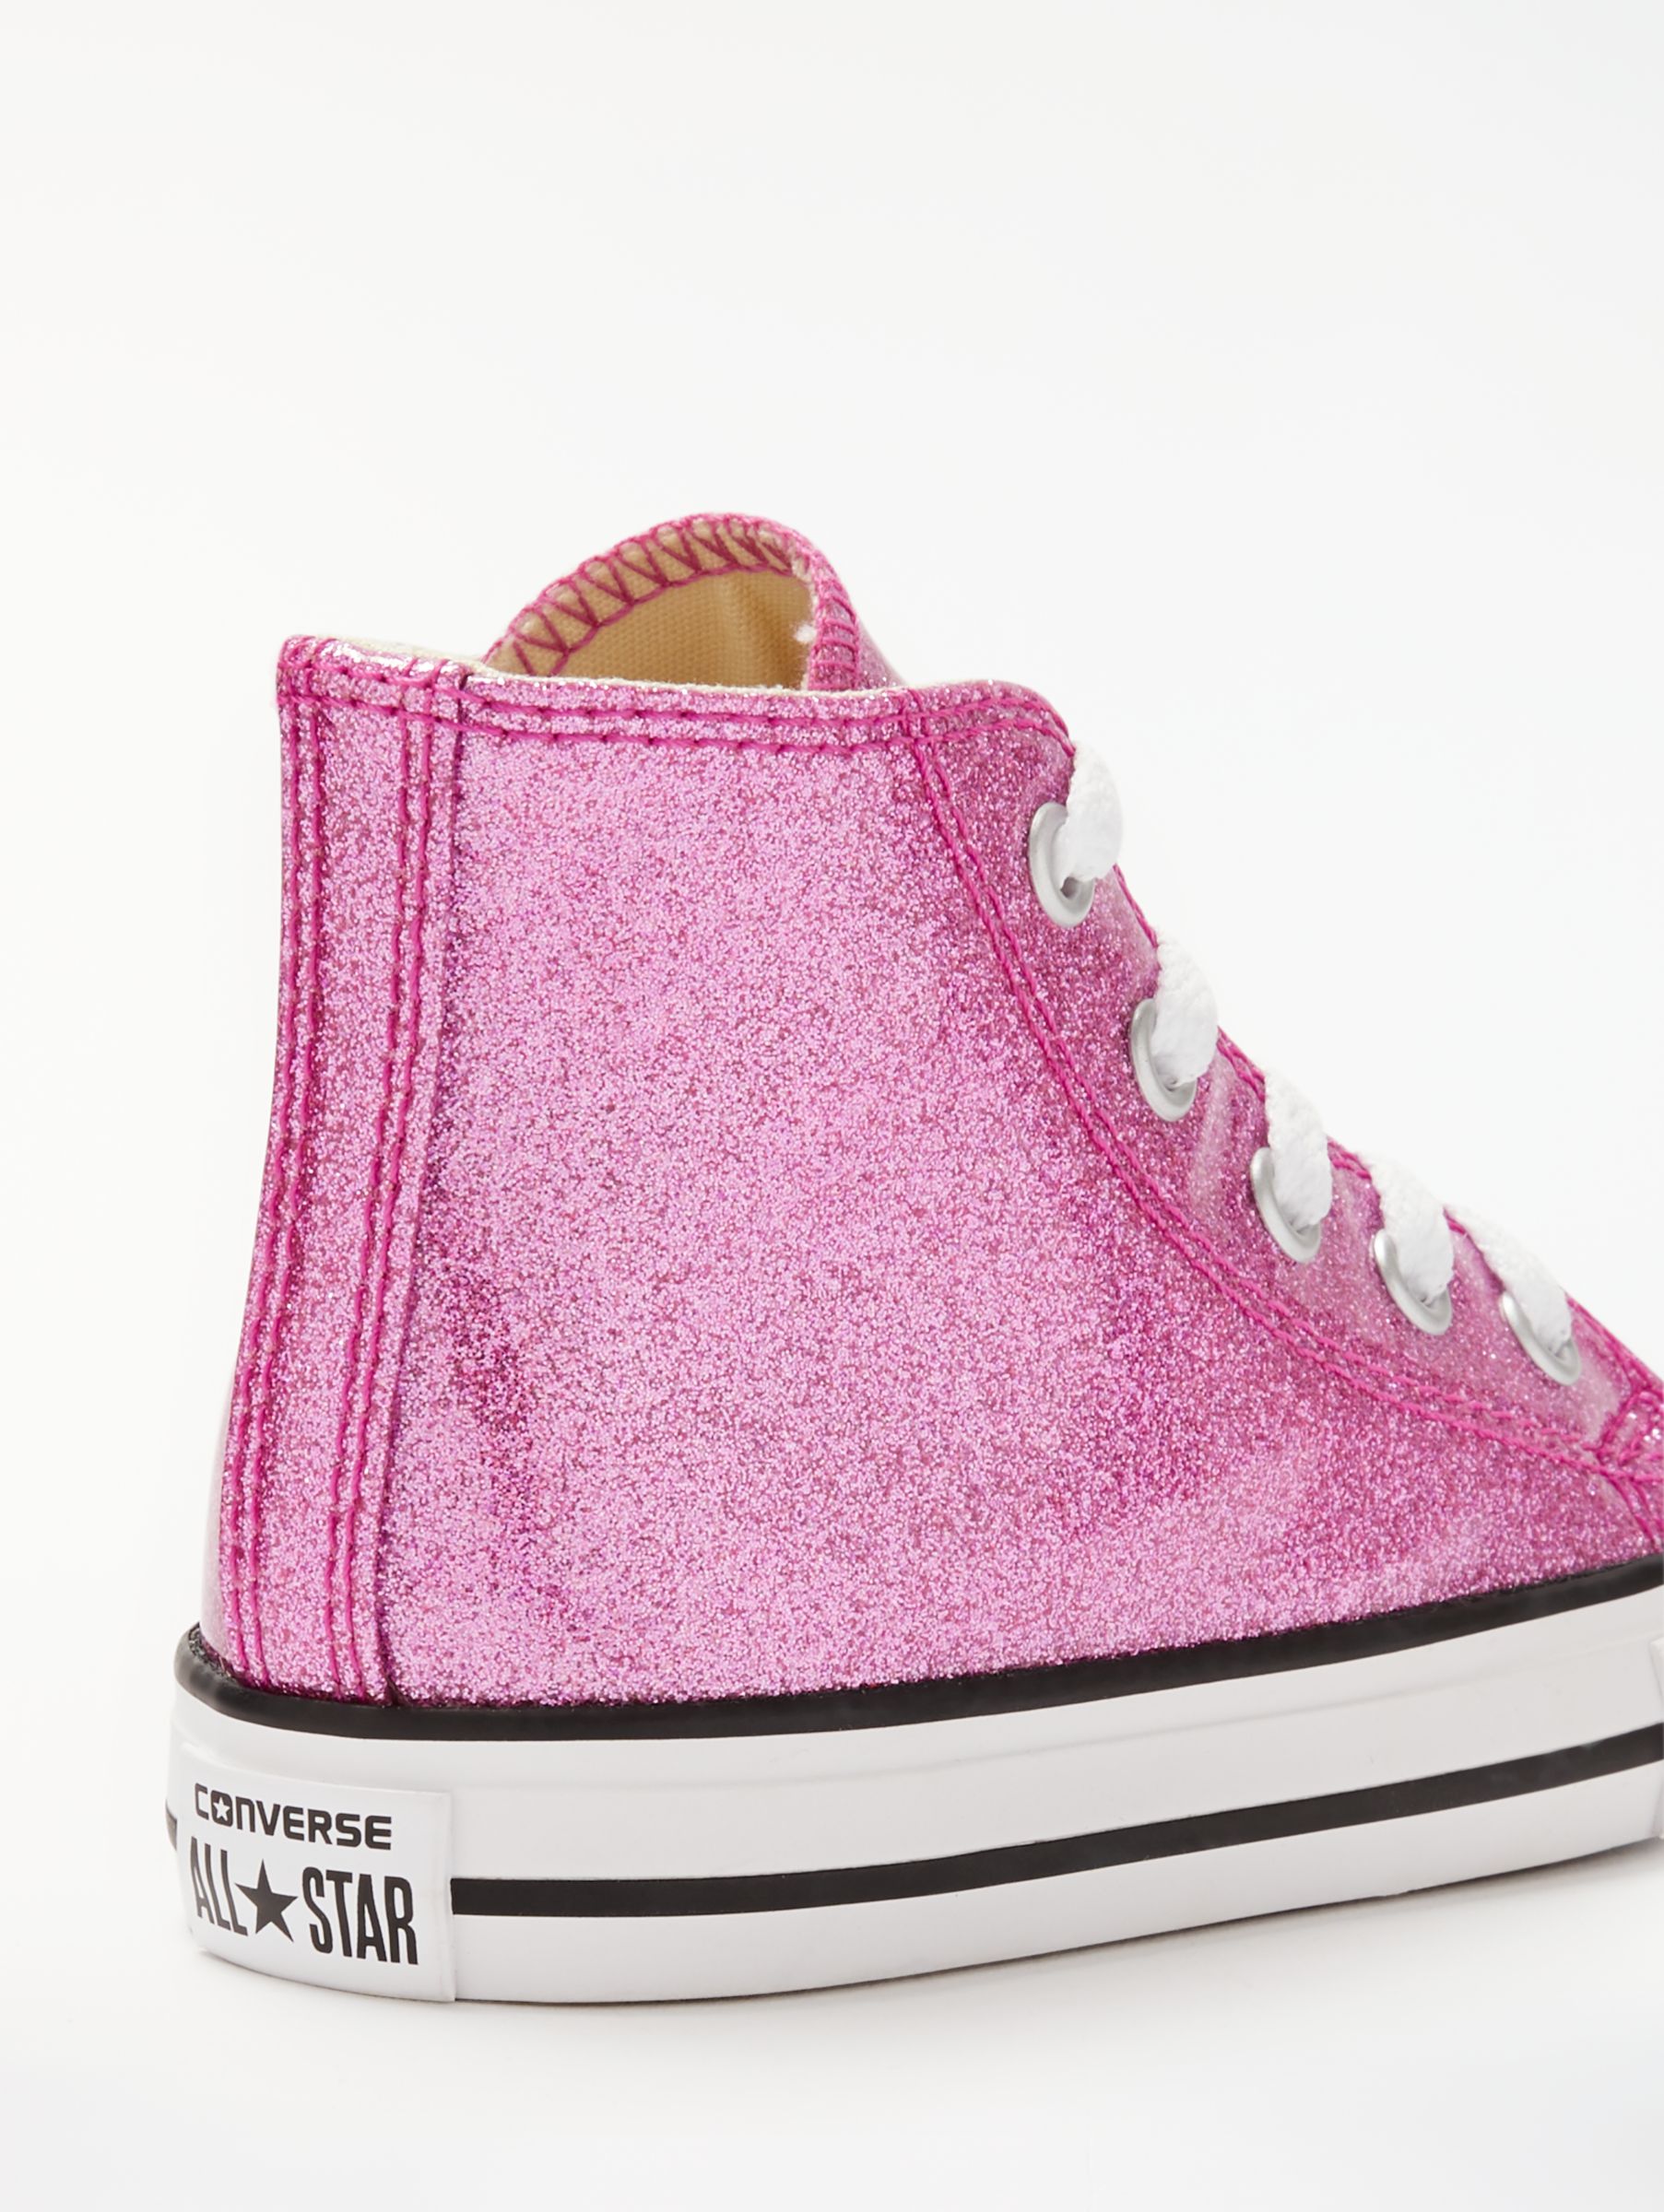 sparkly pink converse high tops